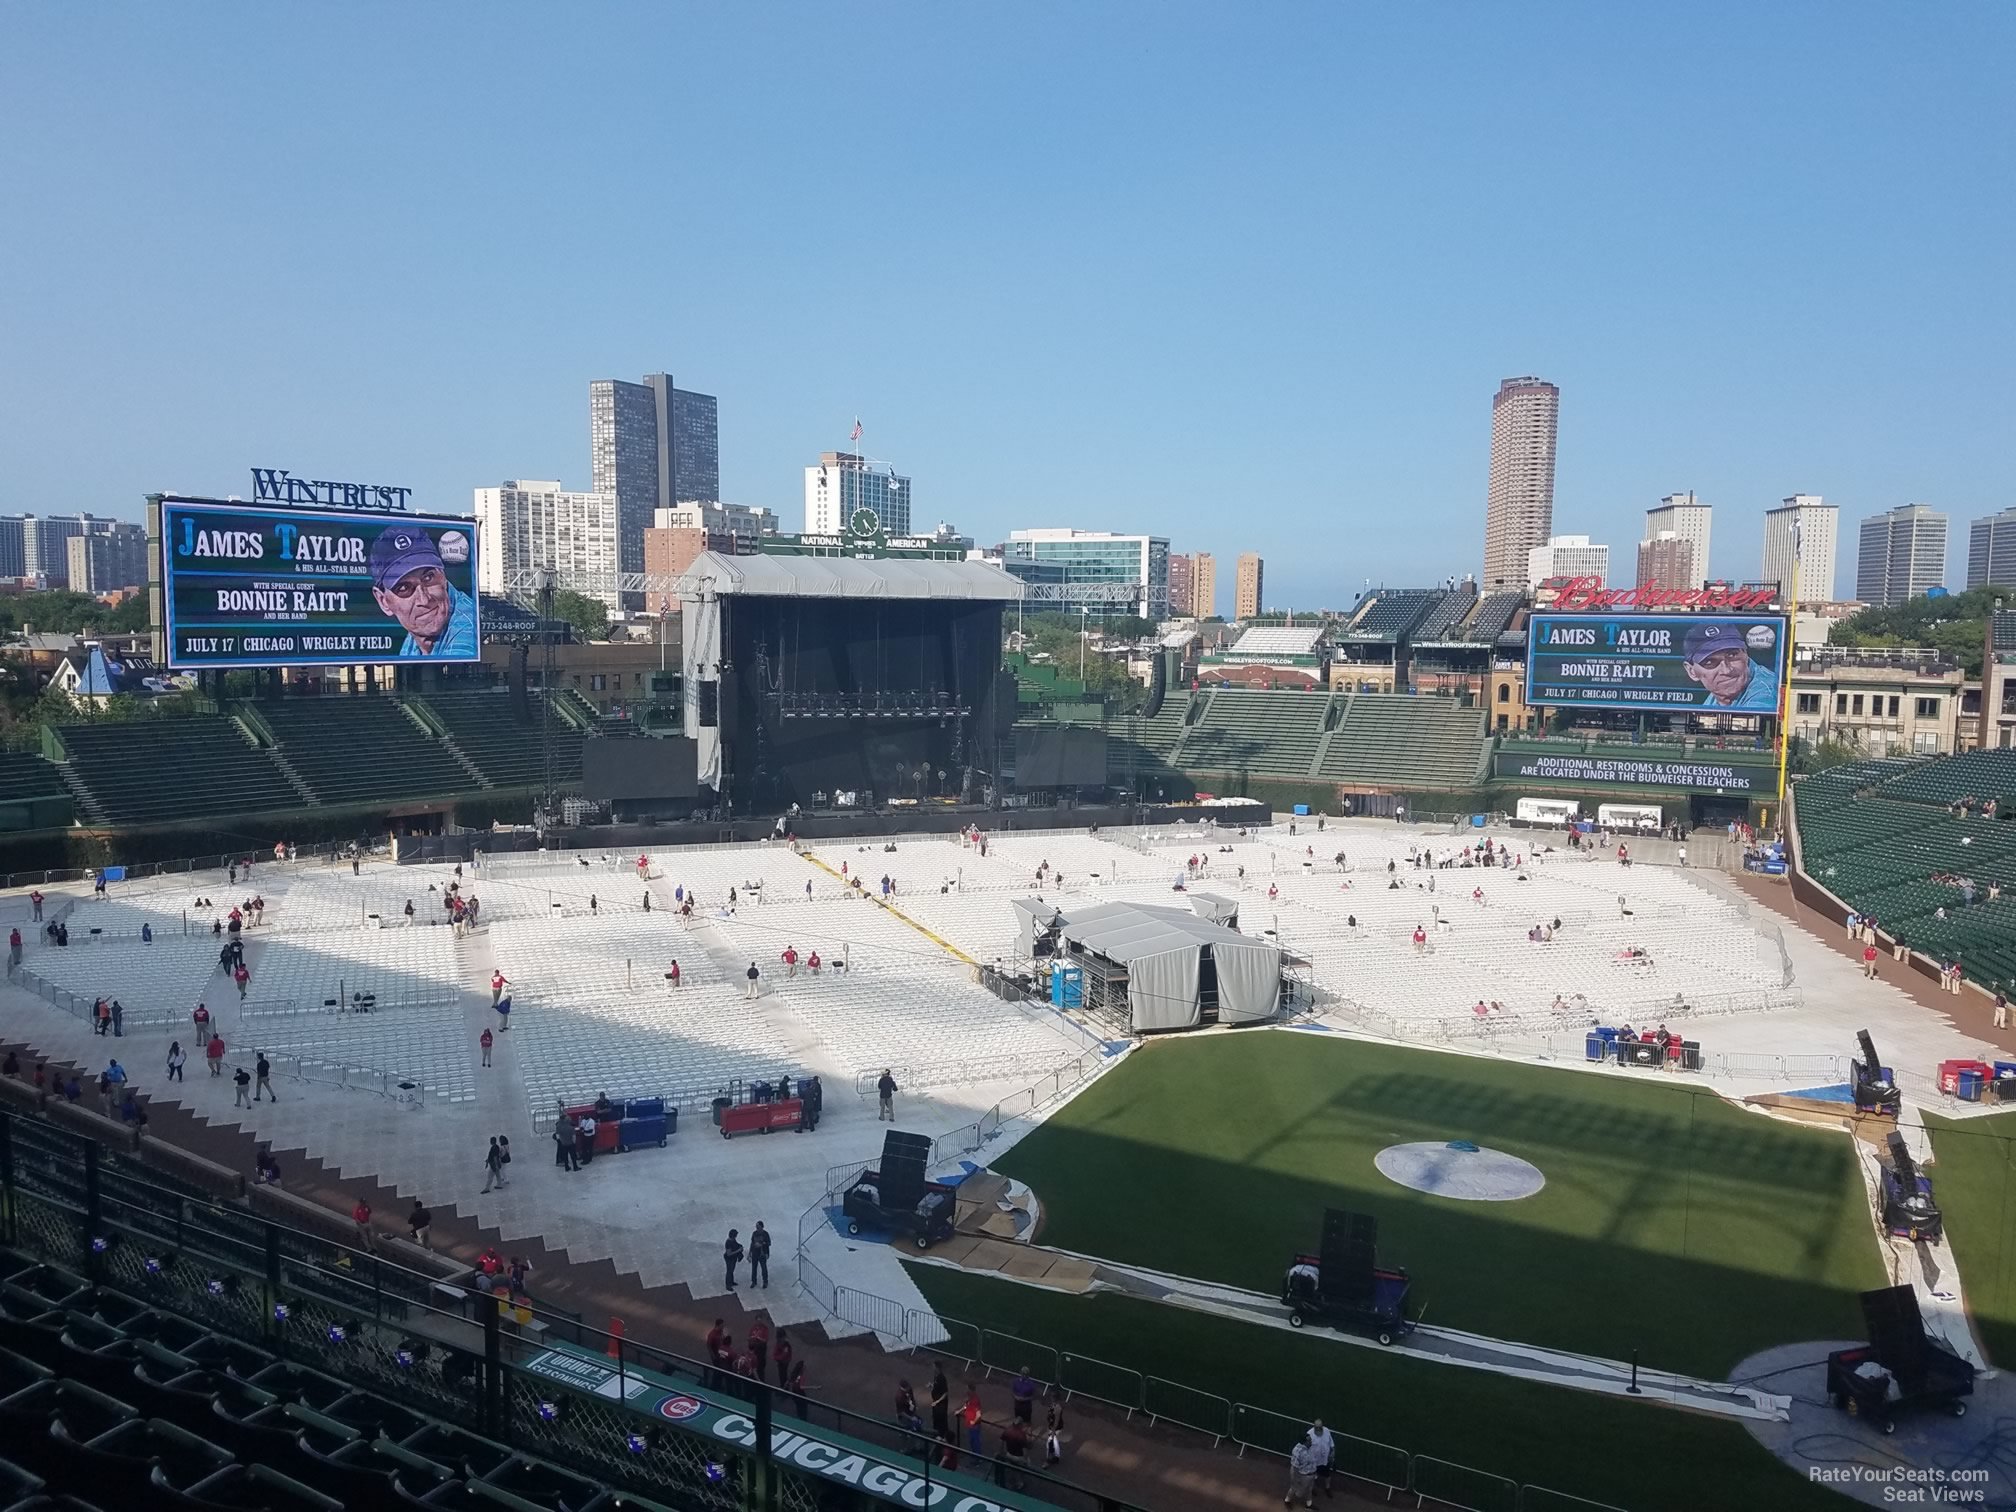 section 313, row 7 seat view  for concert - wrigley field